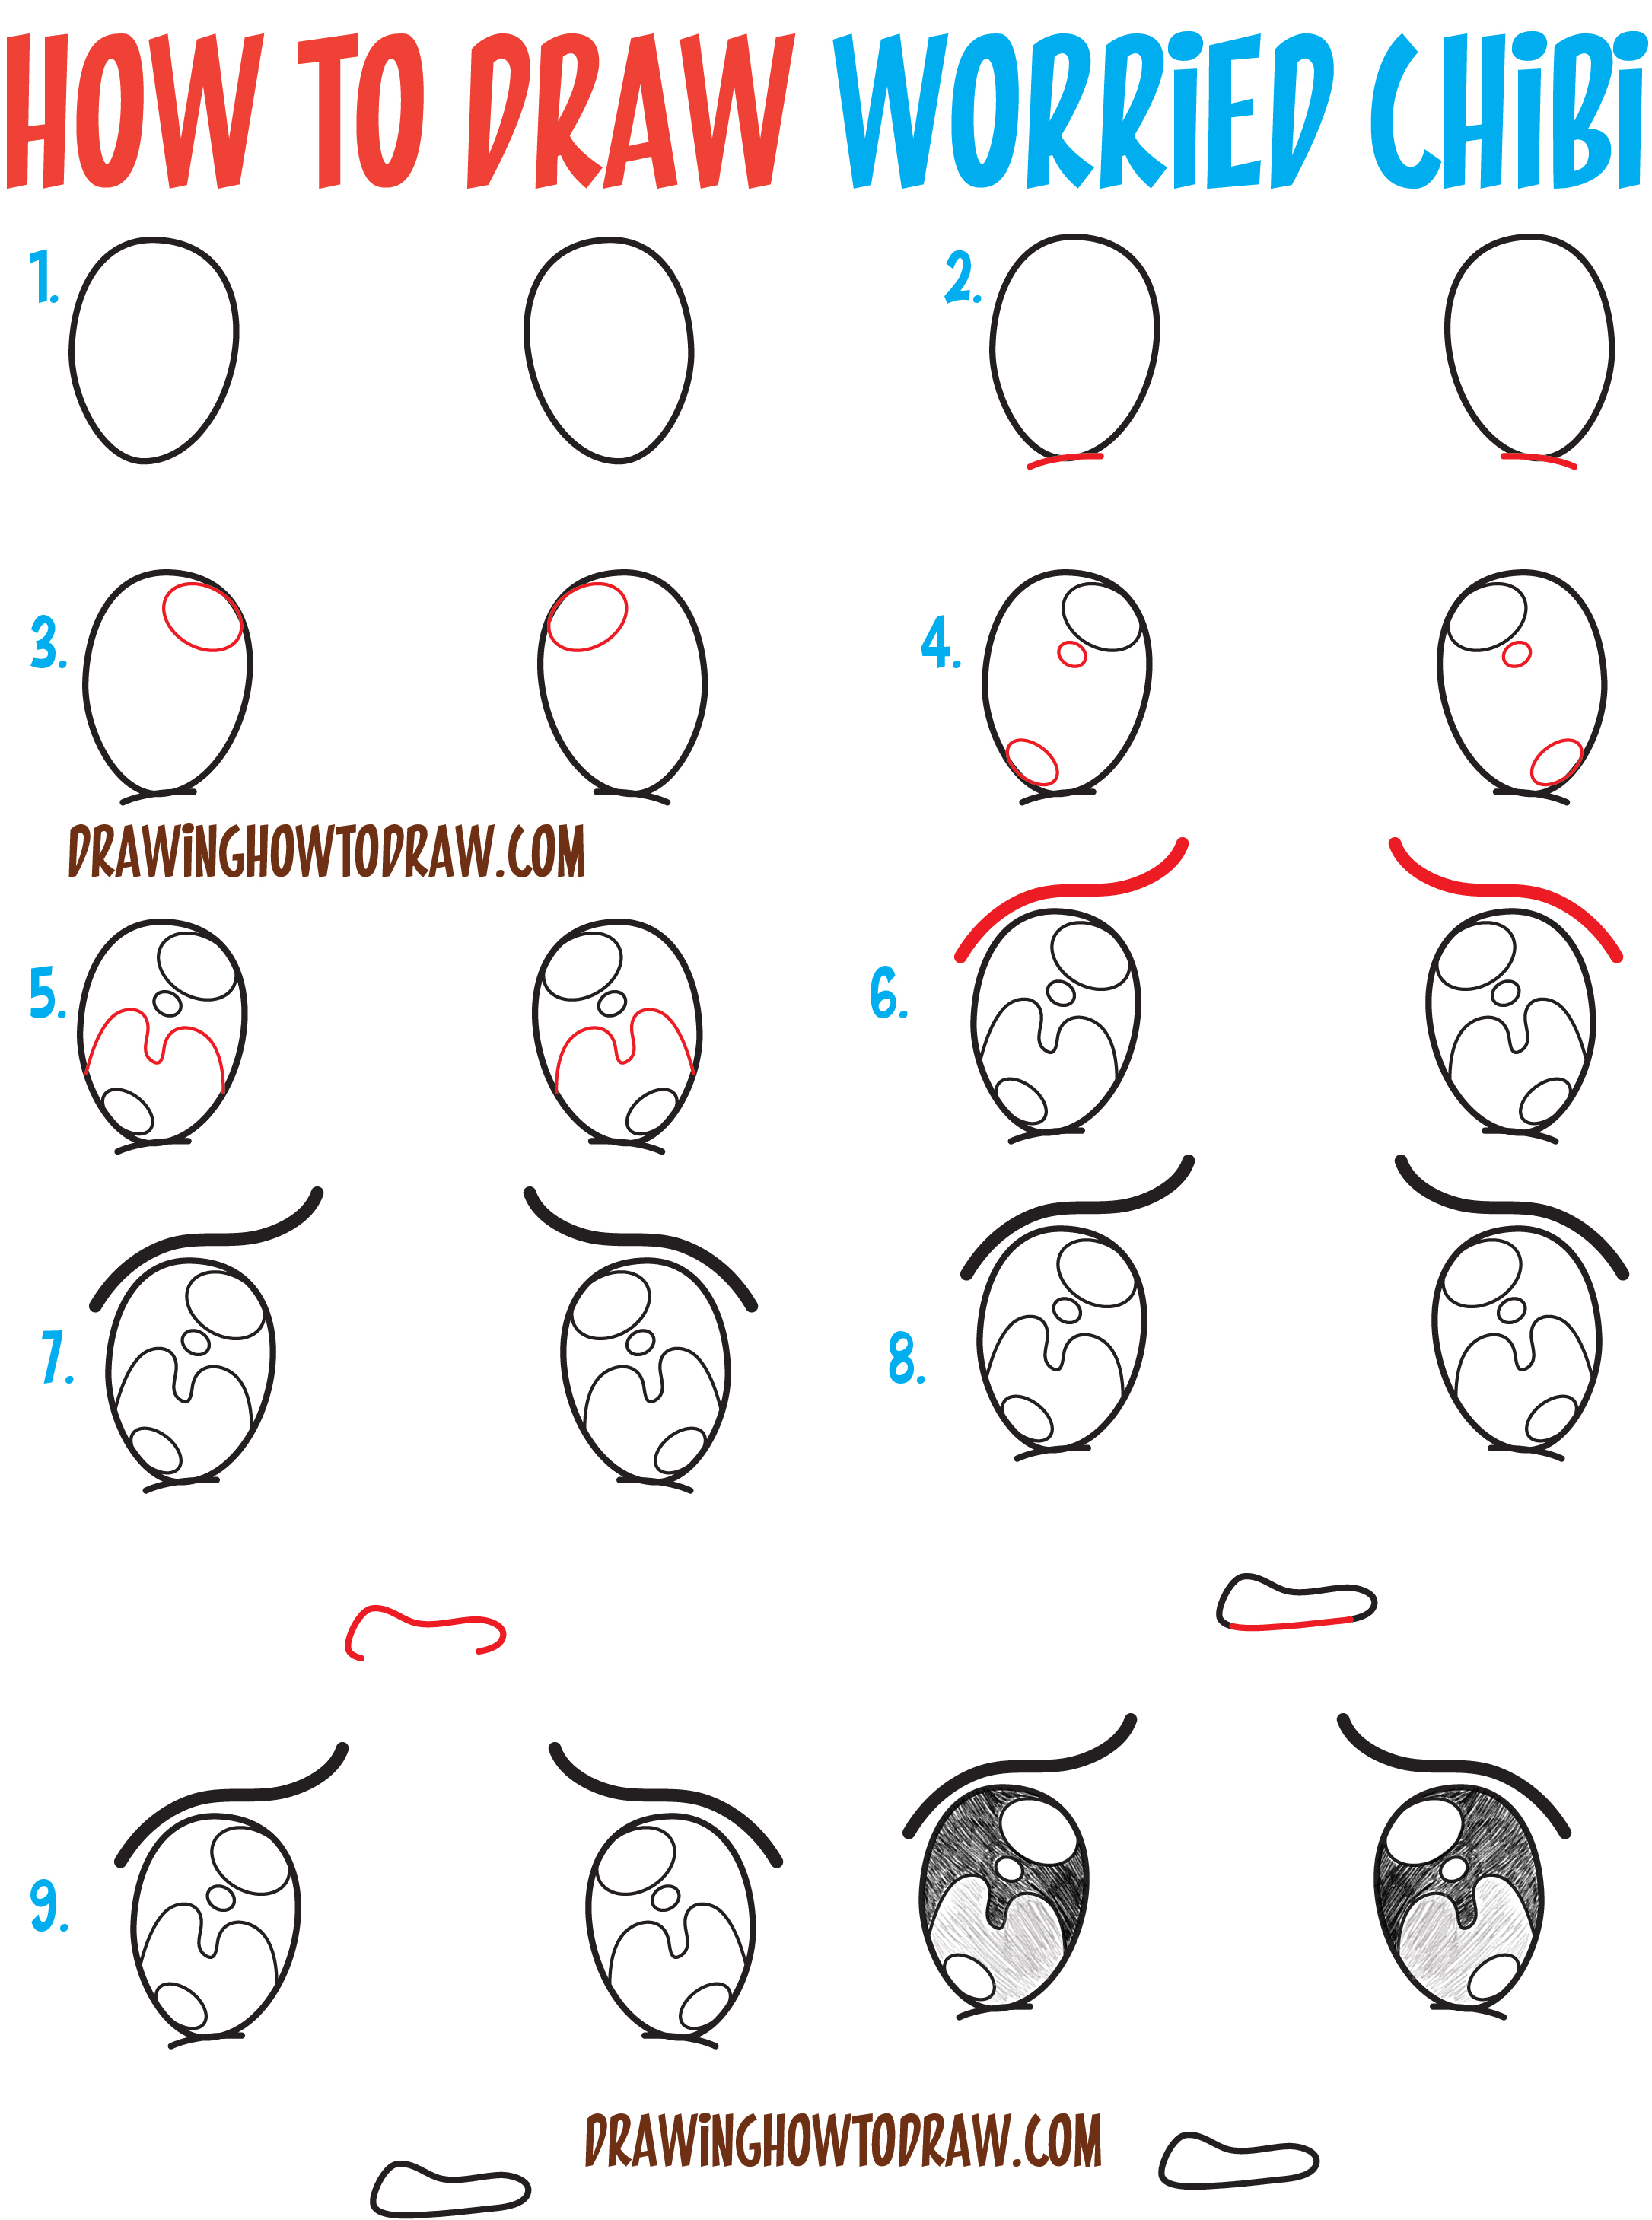 how-to-draw-worried-chibi-expression-nervous-expression-emotion